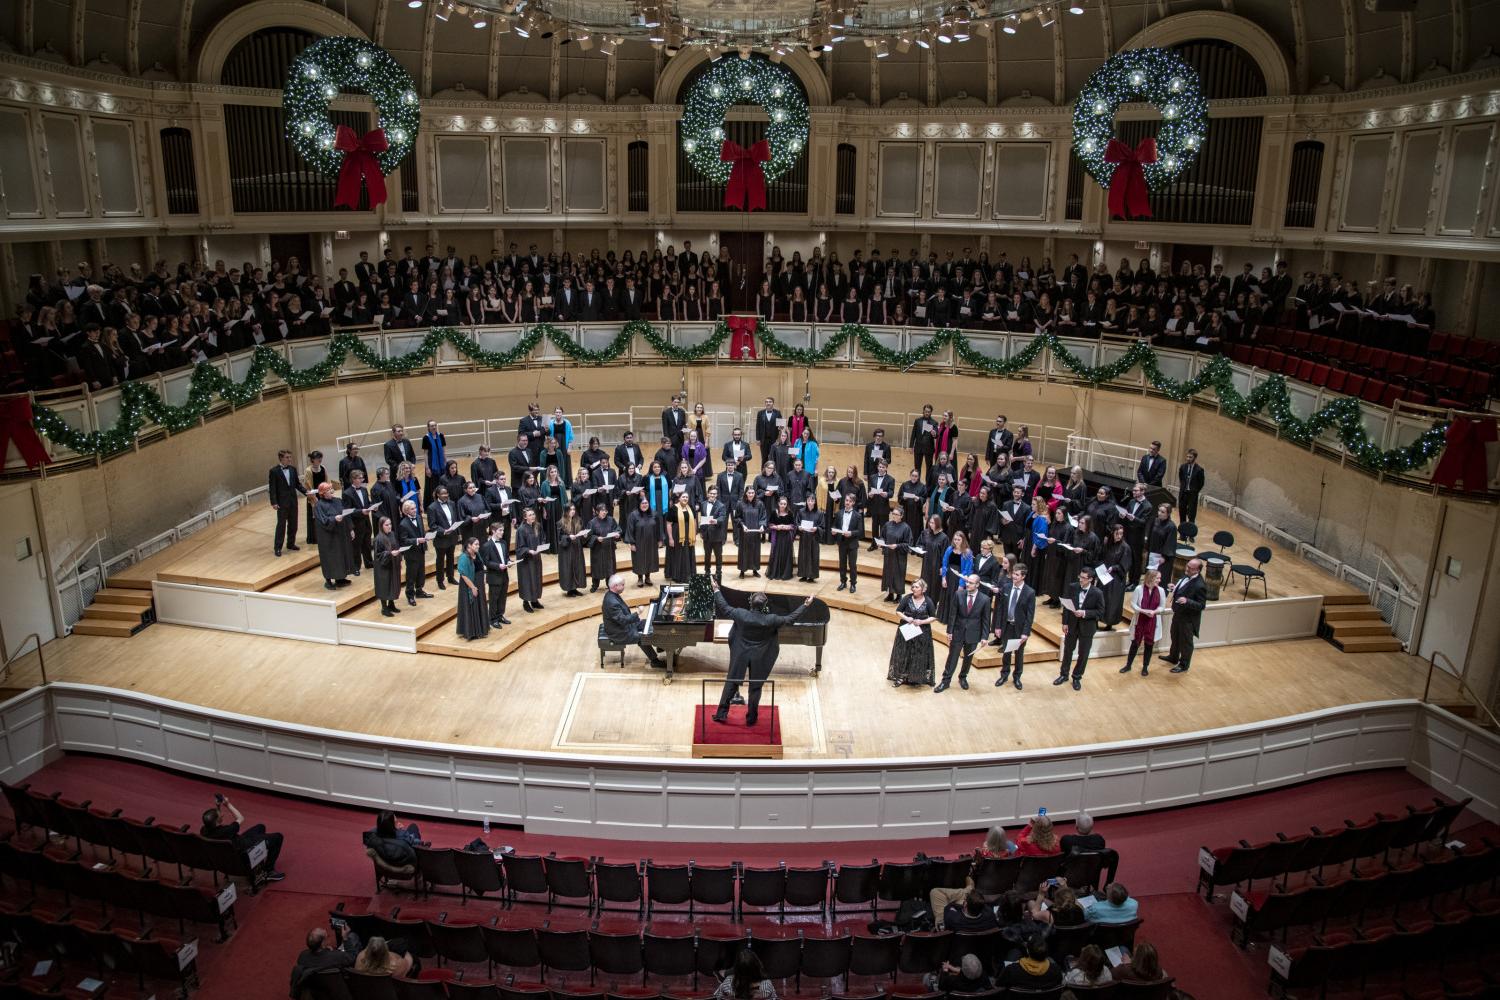 The <a href='http://hcp3.gabonmagazine.com'>bv伟德ios下载</a> Choir performs in the Chicago Symphony Hall.